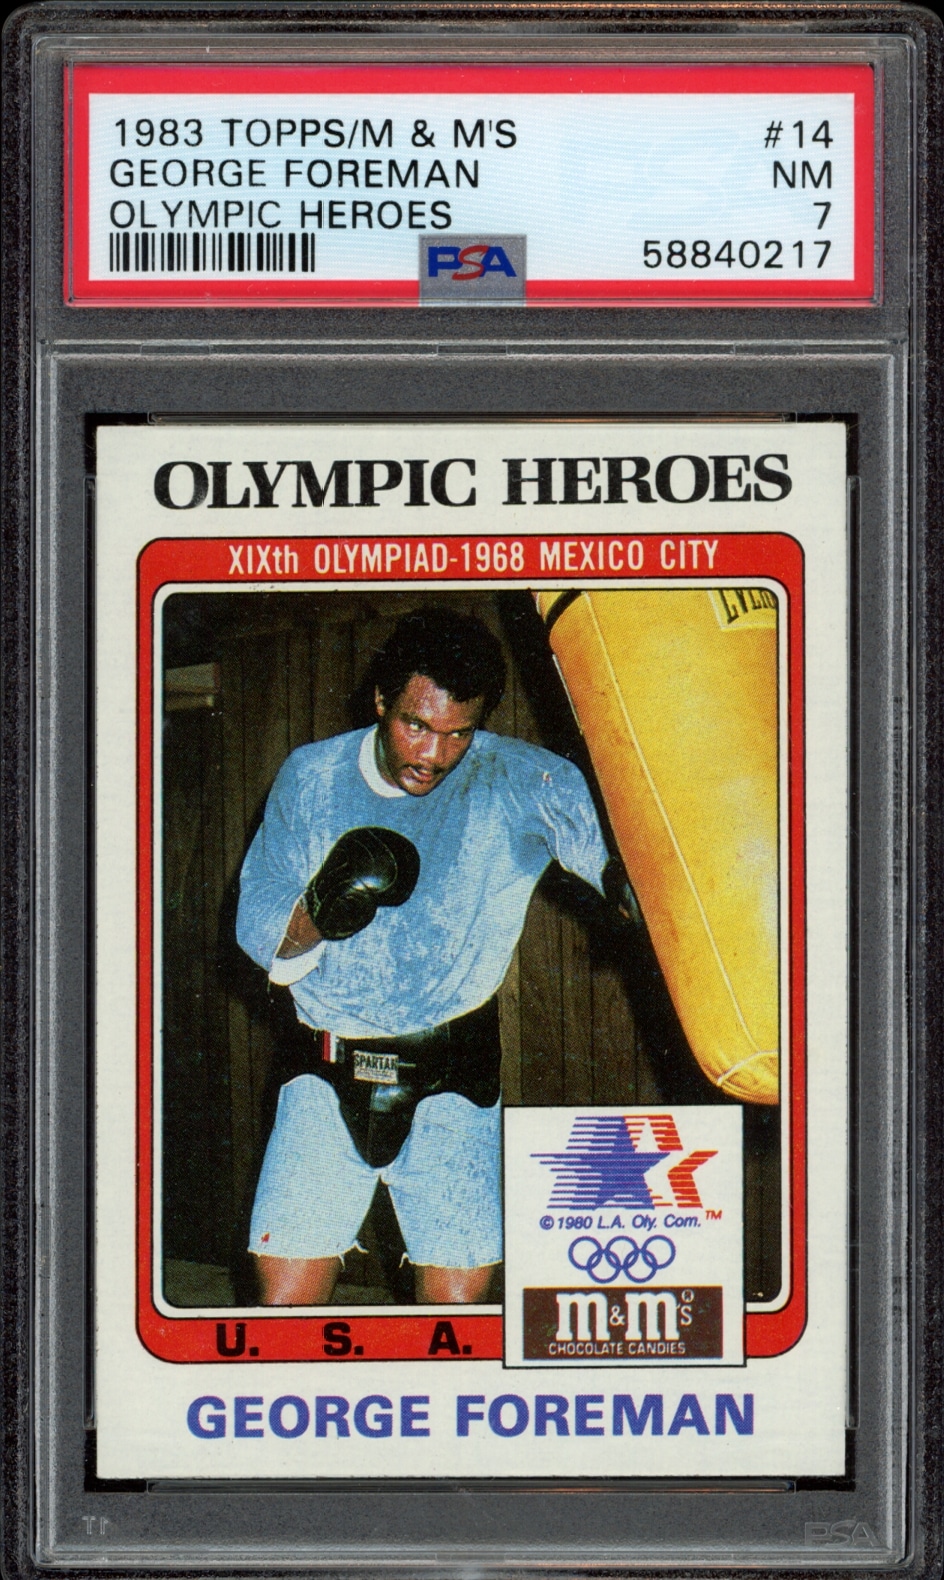 George Foremans 1983 Topps Olympic Heroes sports card rated NM 7 by PSA.